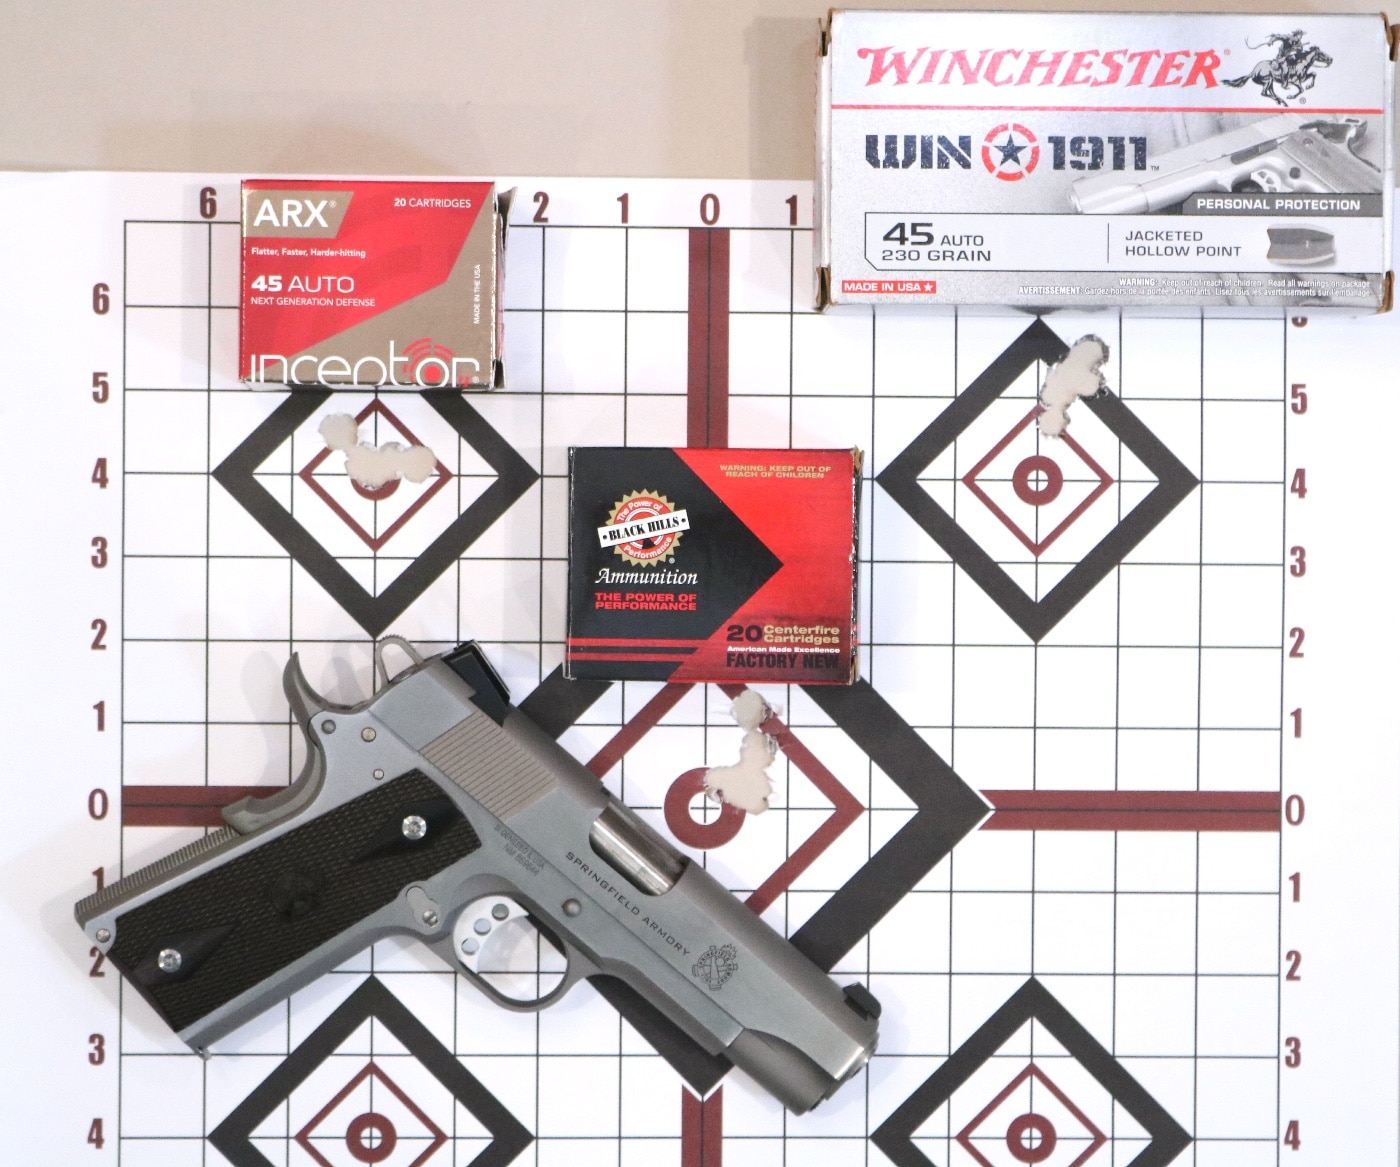 In this digital image, we see the stainless steel Springfield Armory M1911 pistol with a shooting target and ammunition. Ammo from Winchester Ammunition, Inc. provided tight groups and fed well. Another .45 ACP load is from Black Hills Ammunition. Black Hills Ammunition is an American ammunition and reloading supplies manufacturing company based in Rapid City, South Dakota.